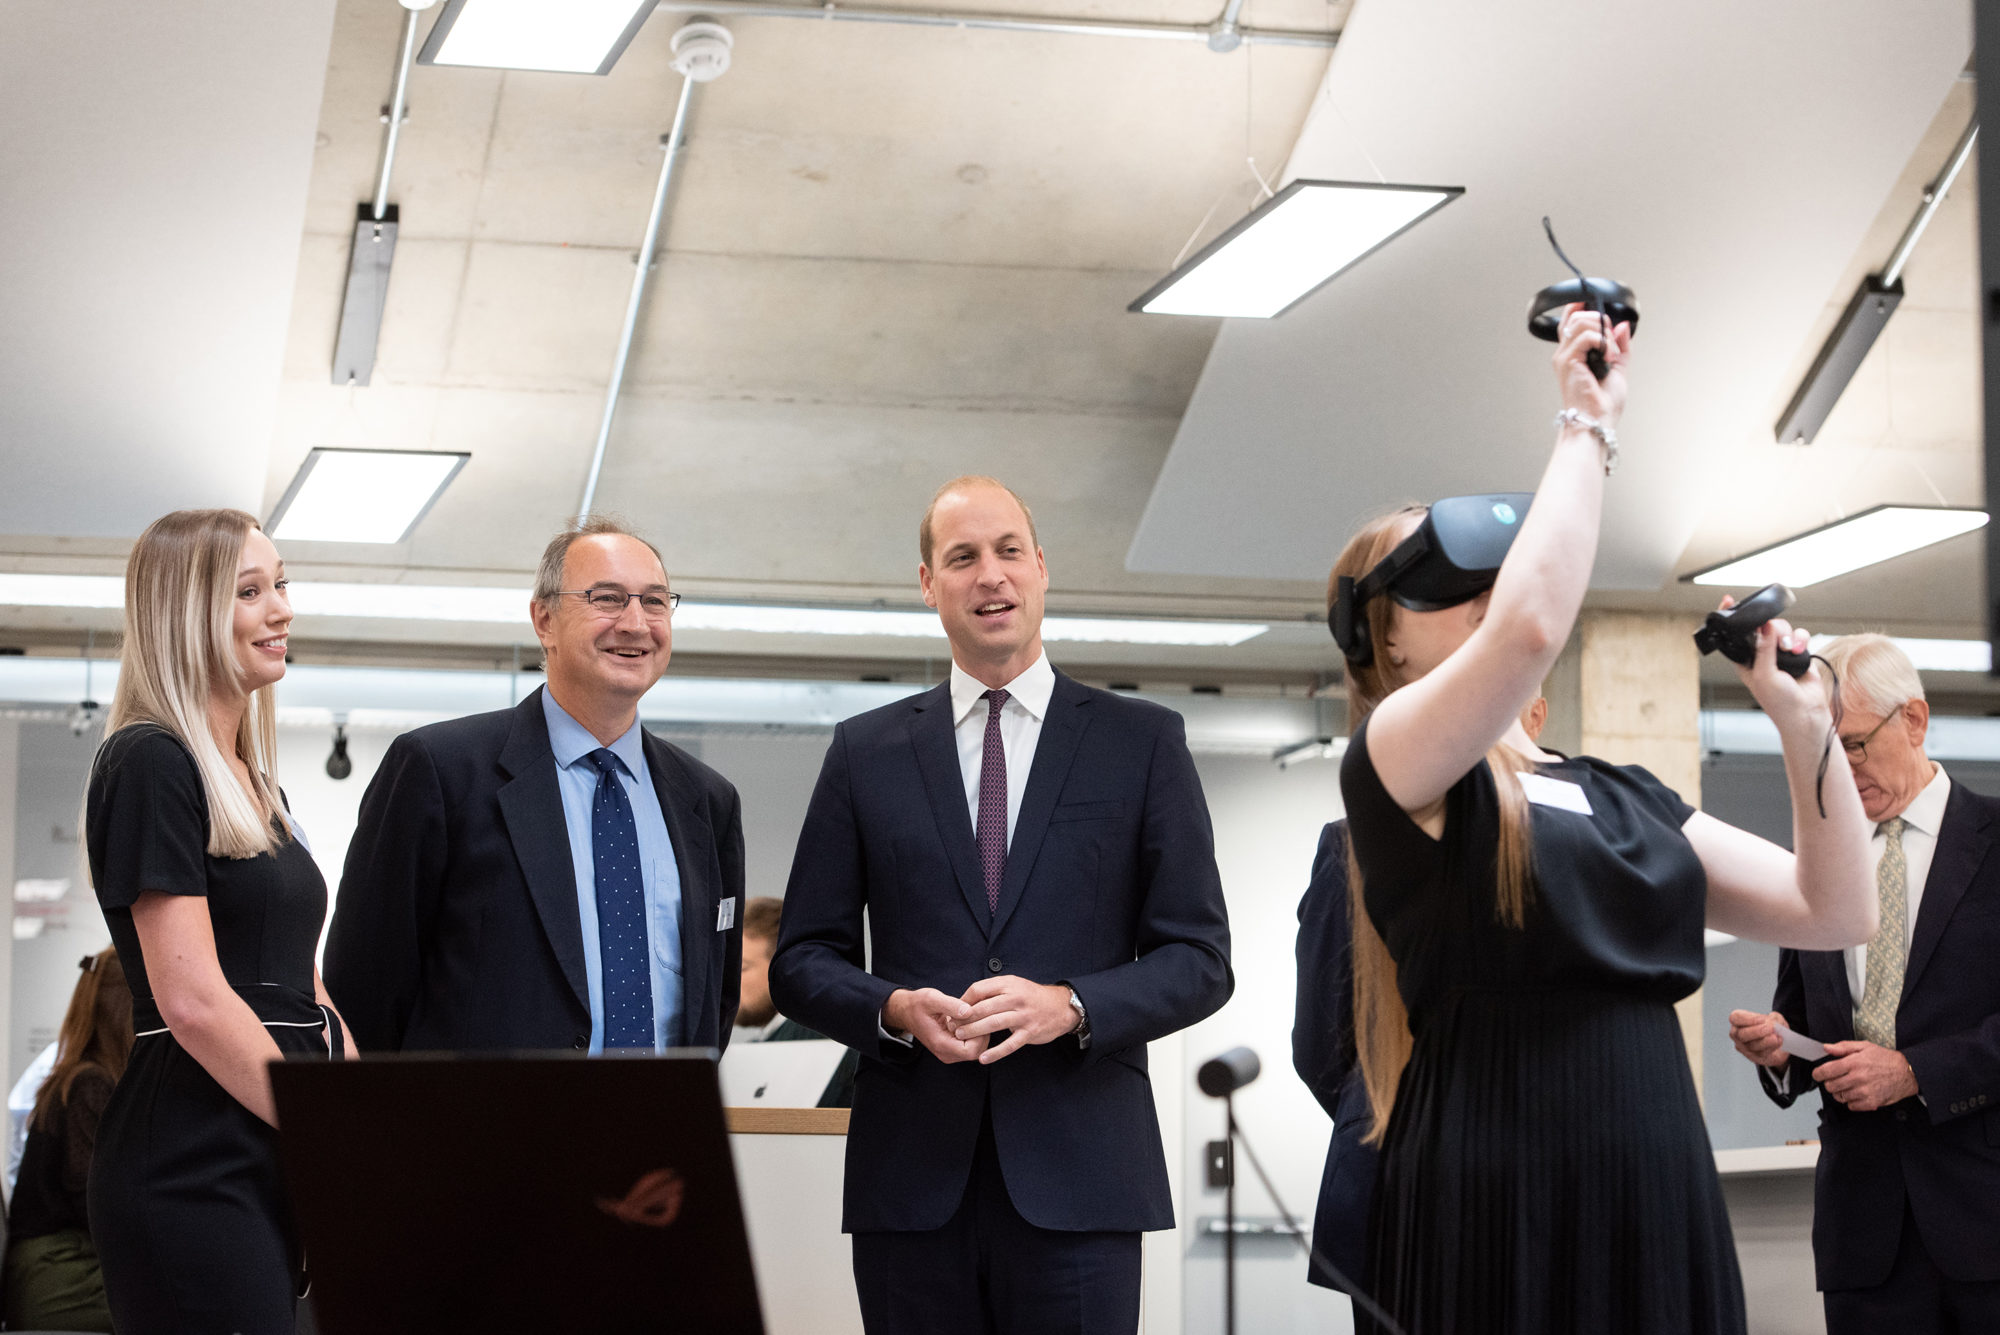 HRH the Duke of Cambridge visits Oxford and learns about Oxford VR’s immersive technology